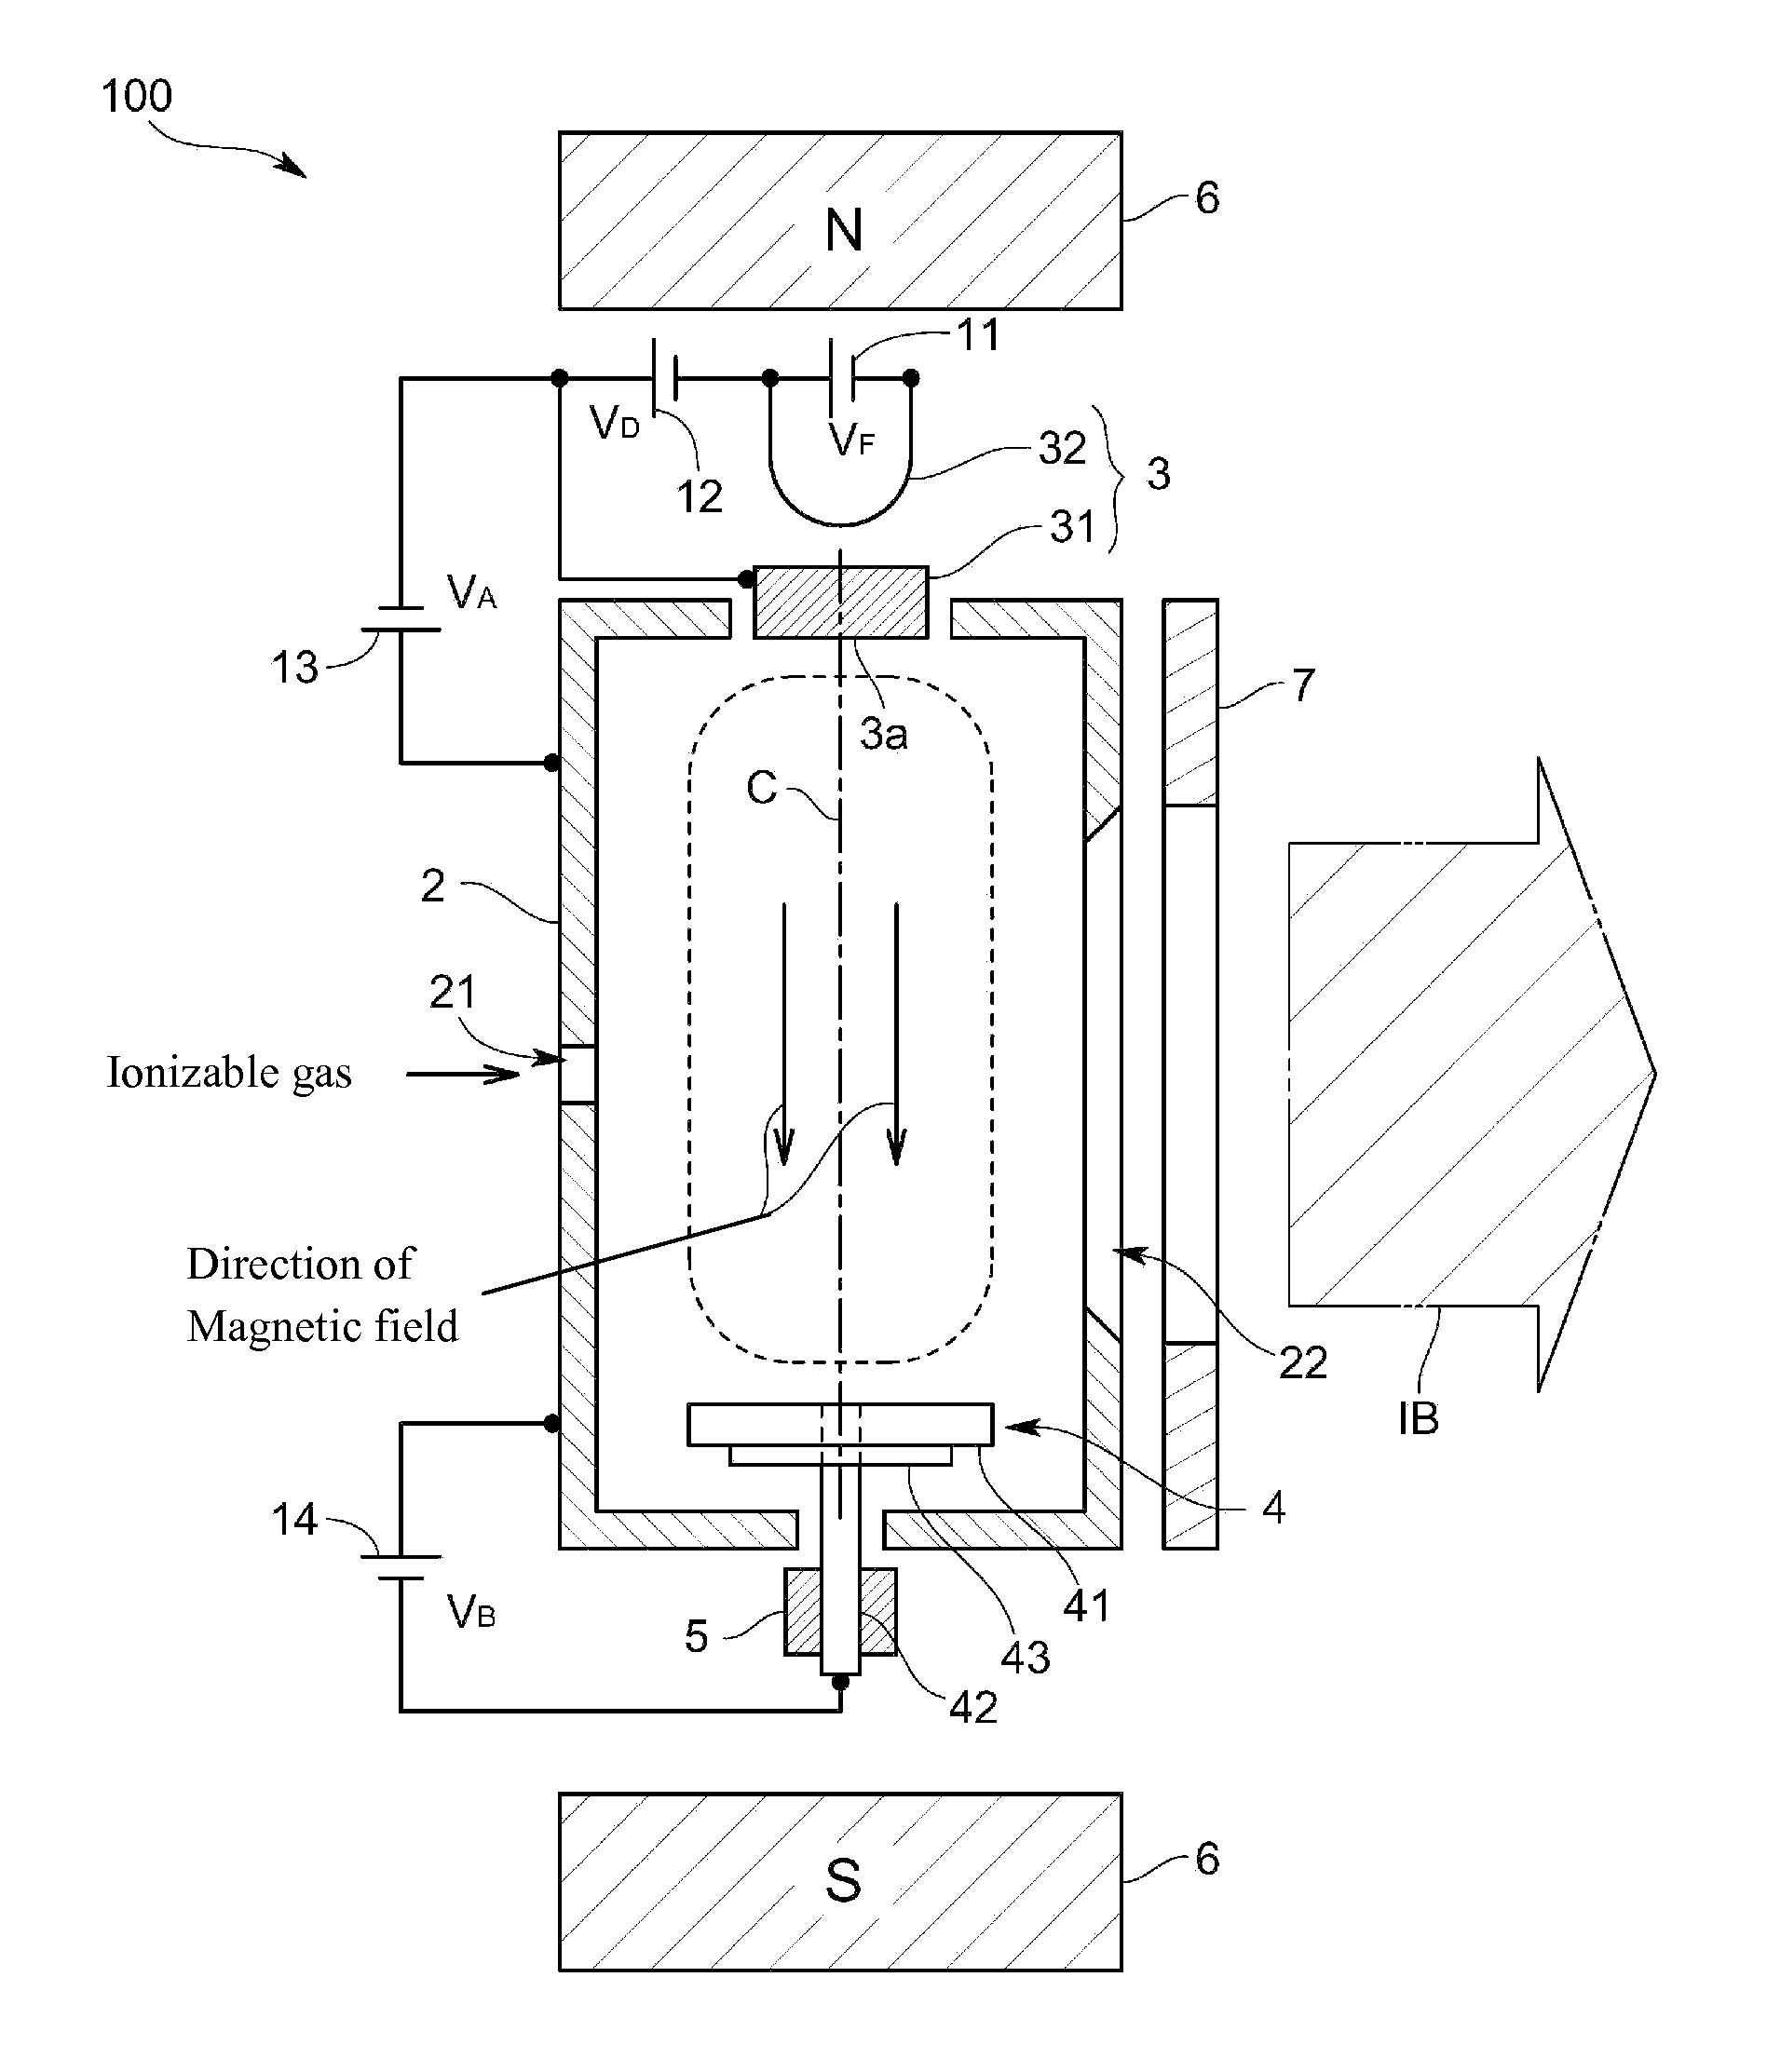 Repeller structure and ion source